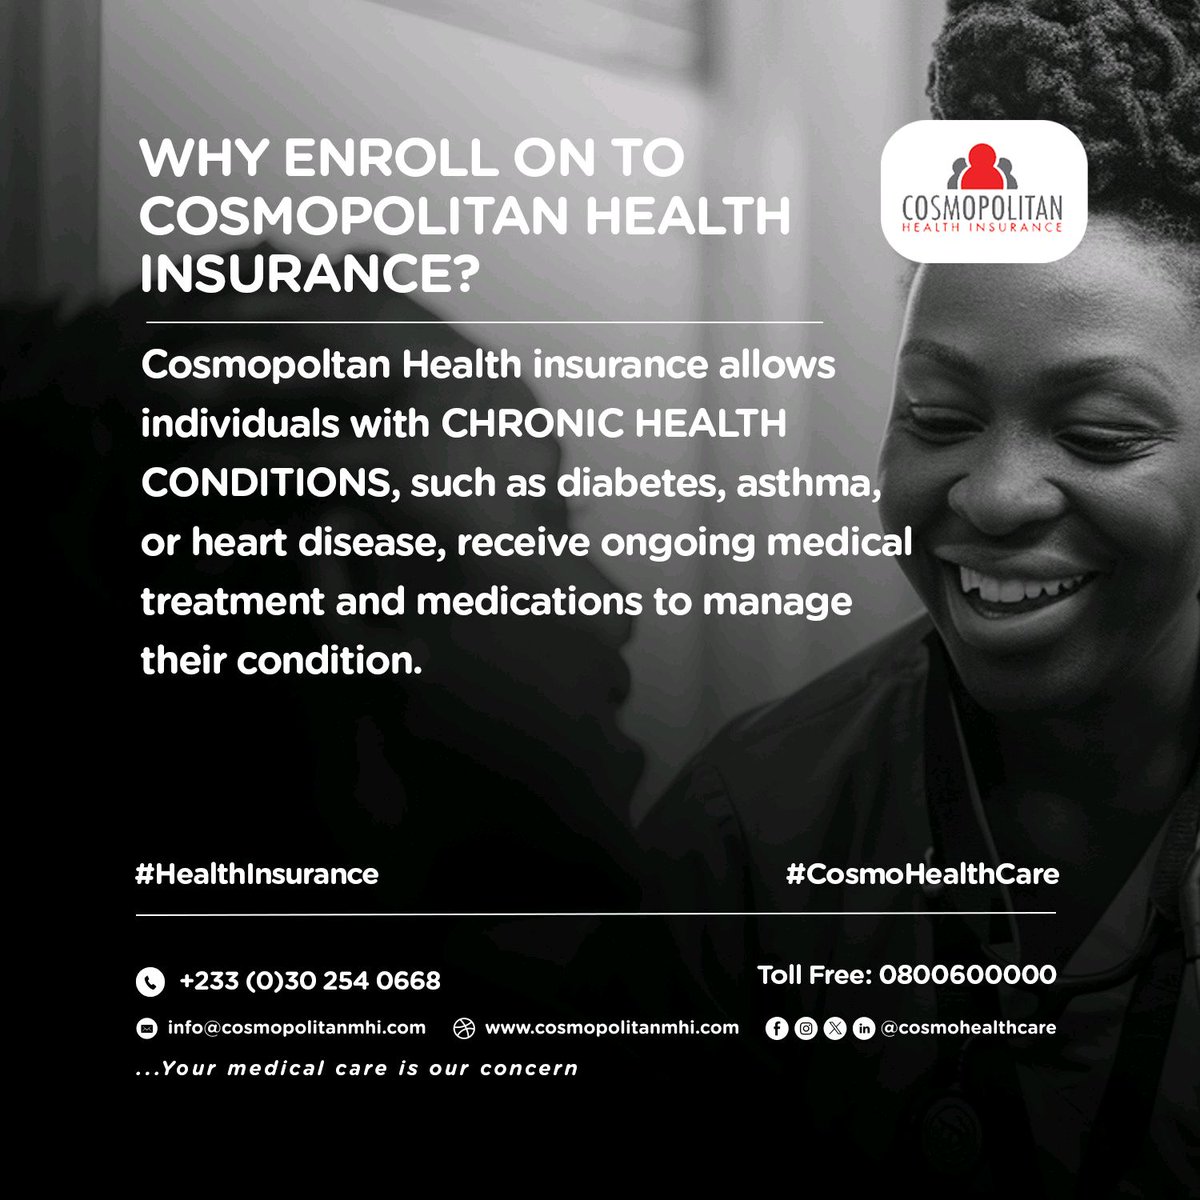 New Week! New Vibes!

Here's another 'Why enroll on to Cosmopolitan Health Insurance?'....

Still in doubt or uncertain? DM us, Call Us Today!

Your medical care is our concern!

#CosmoHealthCare
#HealthInsurance
#LiveHealthy